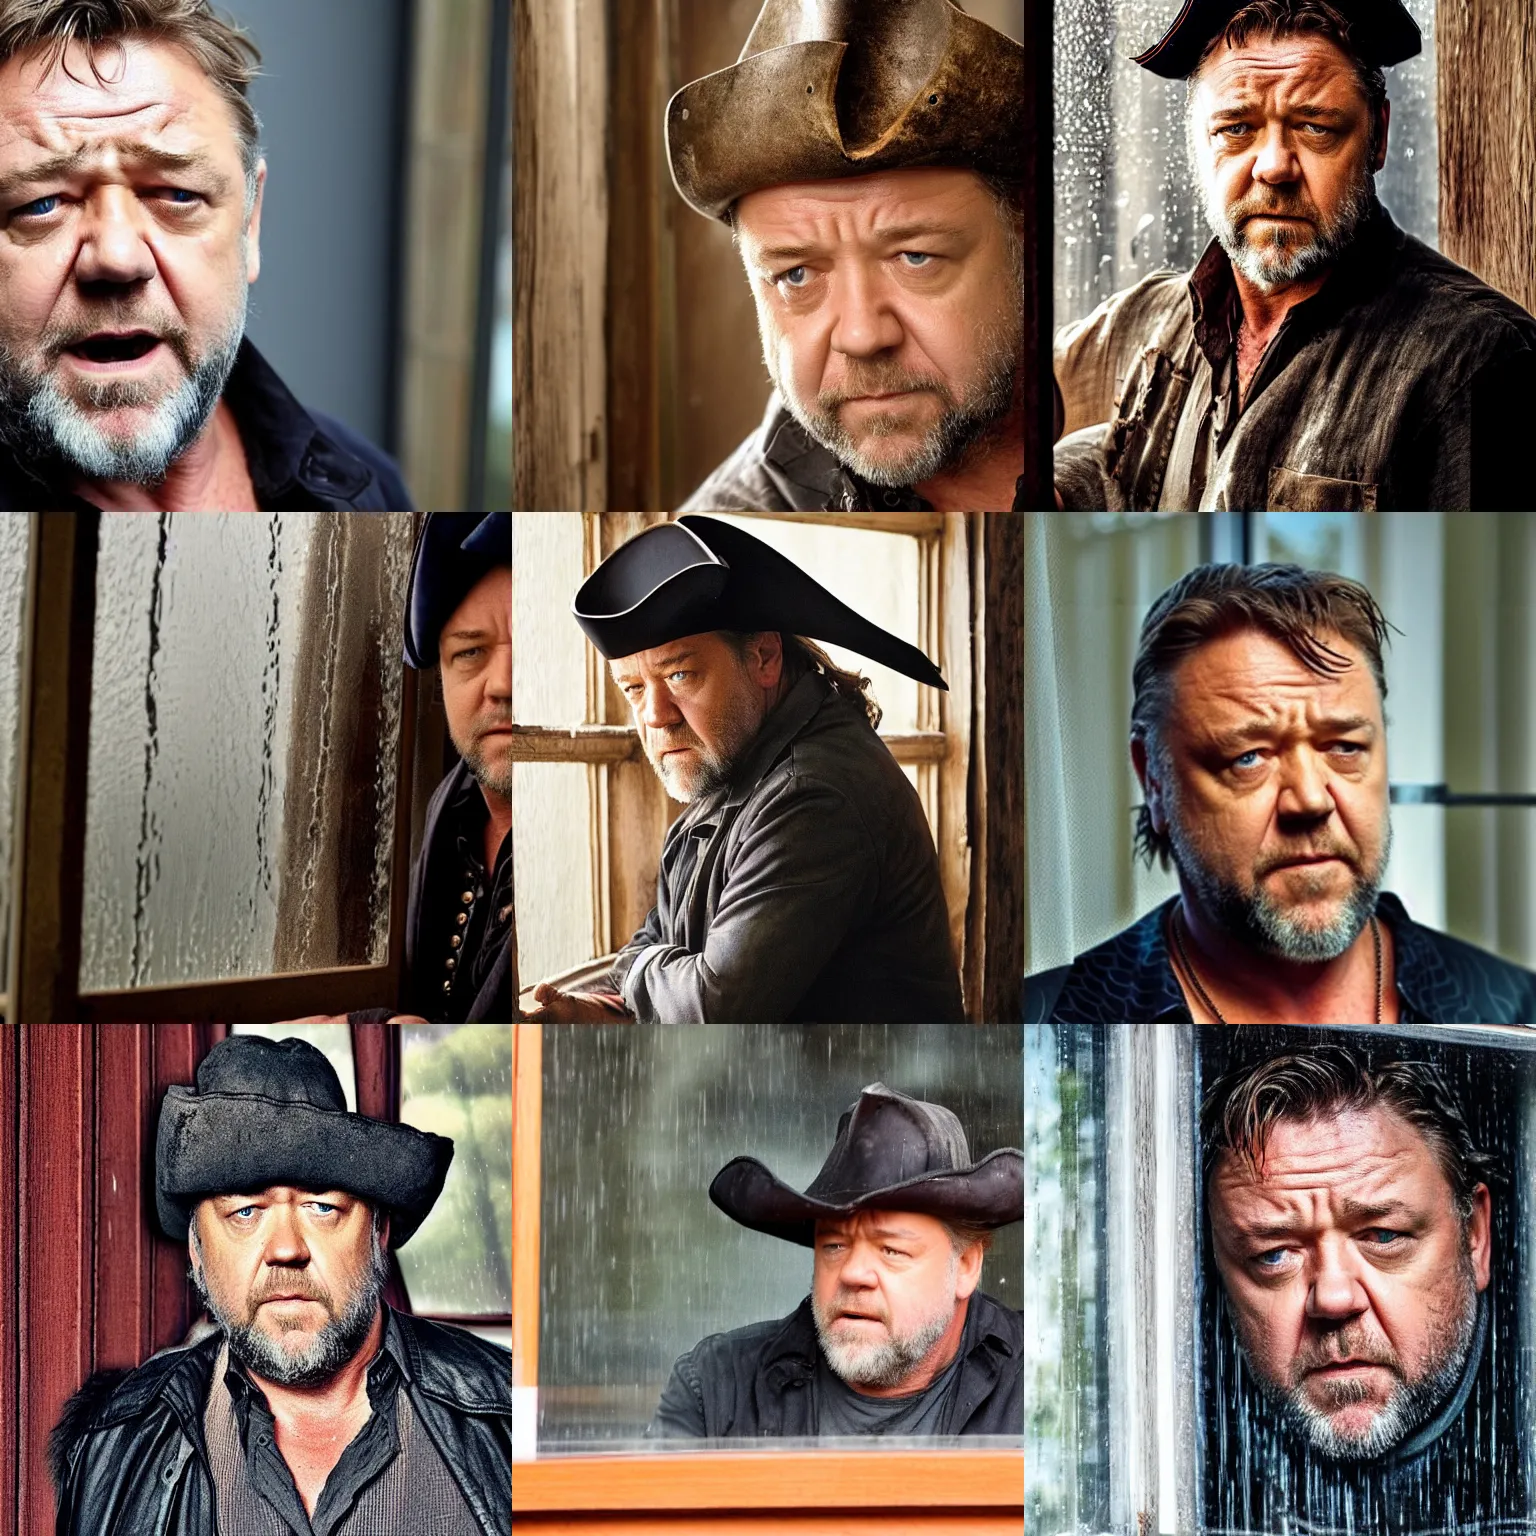 Prompt: concerned russell crowe wearing a big pirate hat standing behind a rainy dirty window and wooden wall peering out towards the camera